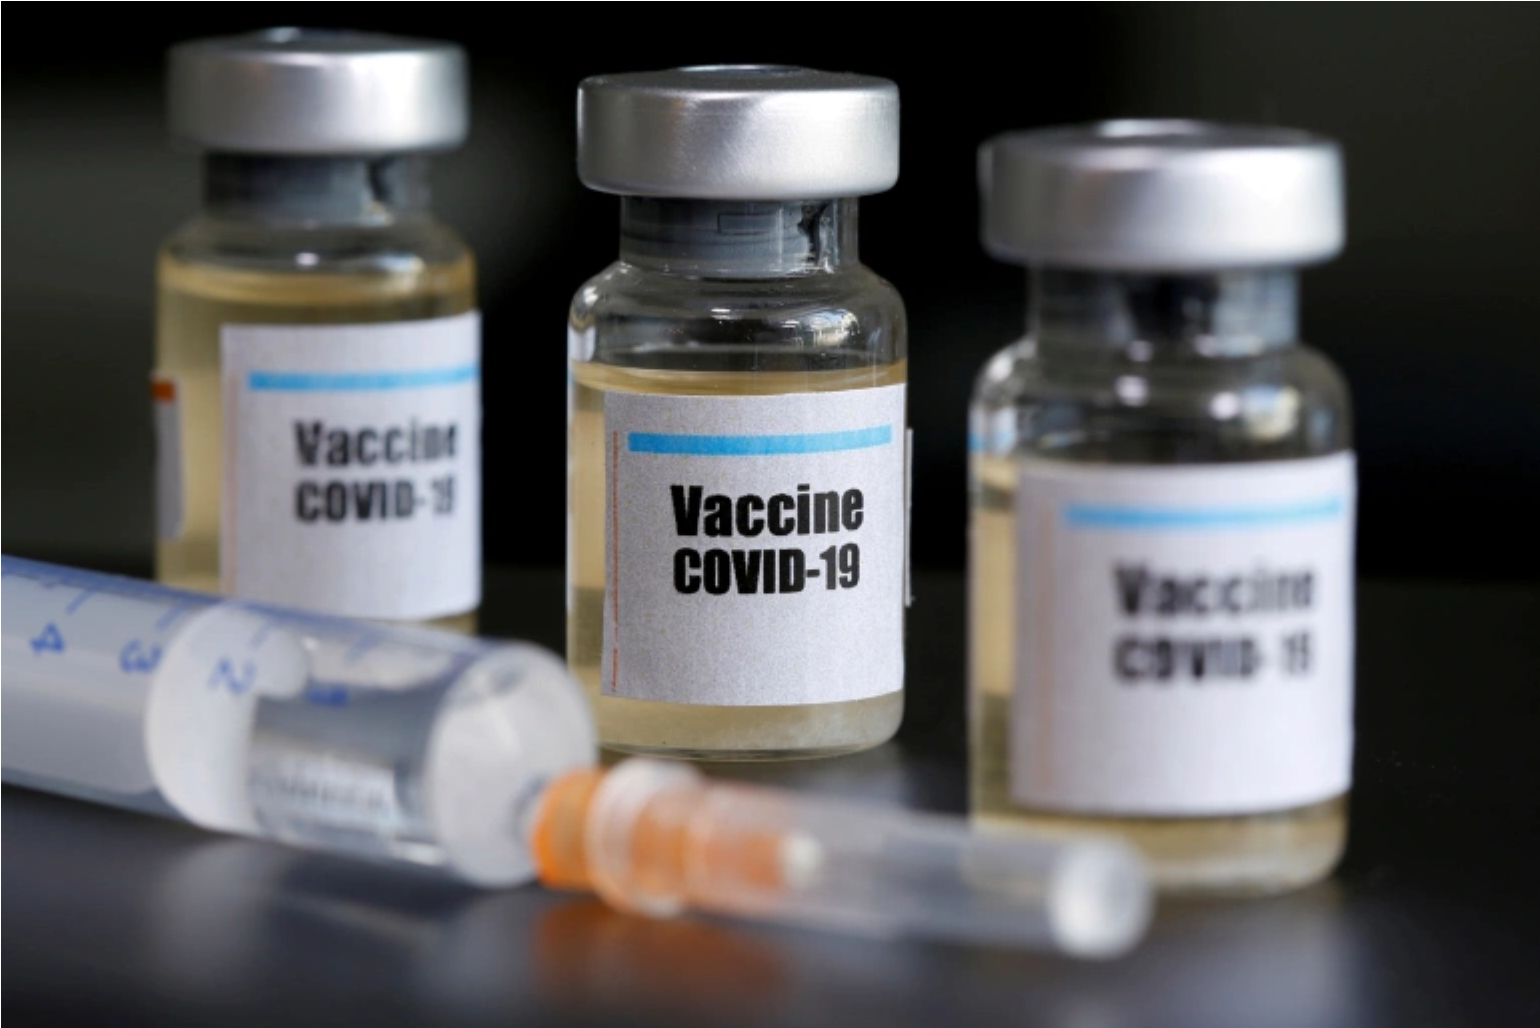 Health ministry concerned over ‘vaccine hesitancy’